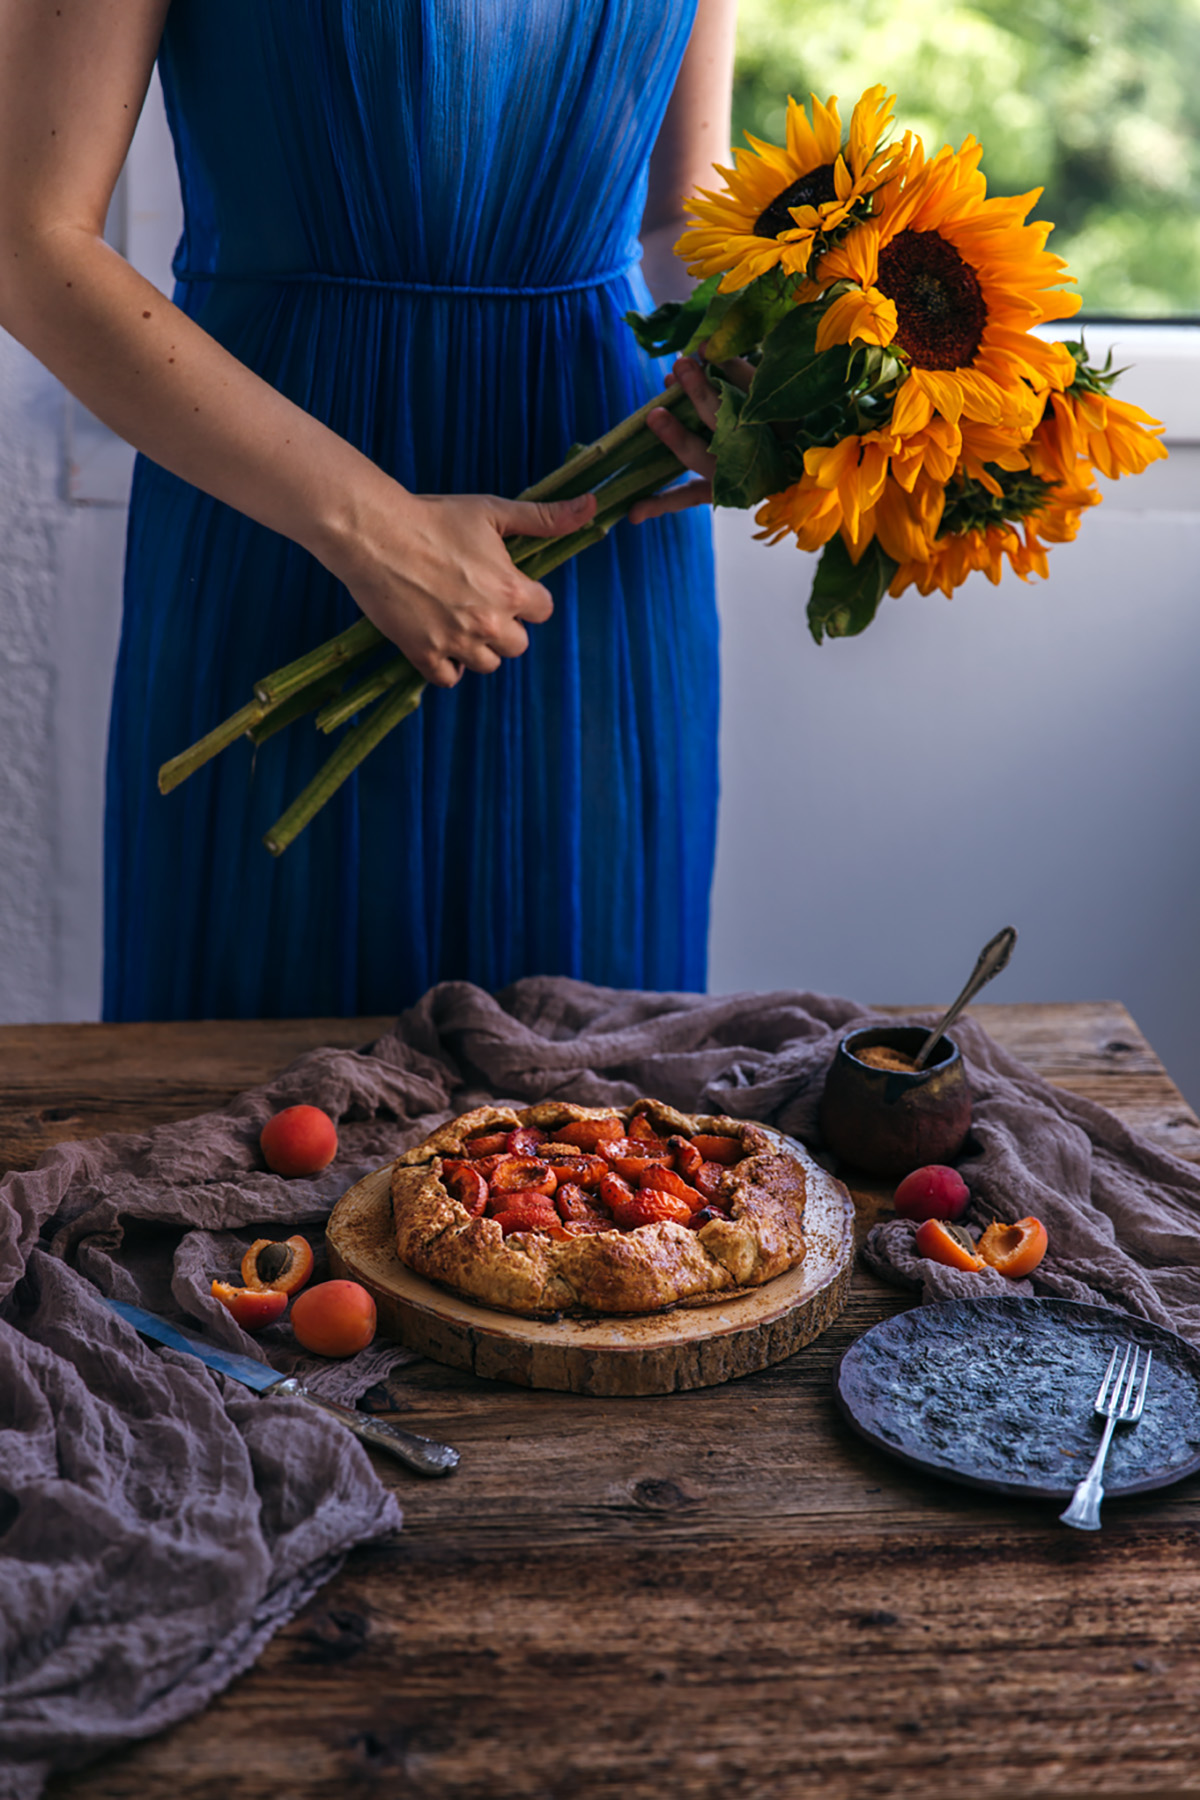 Rustic apricot galette